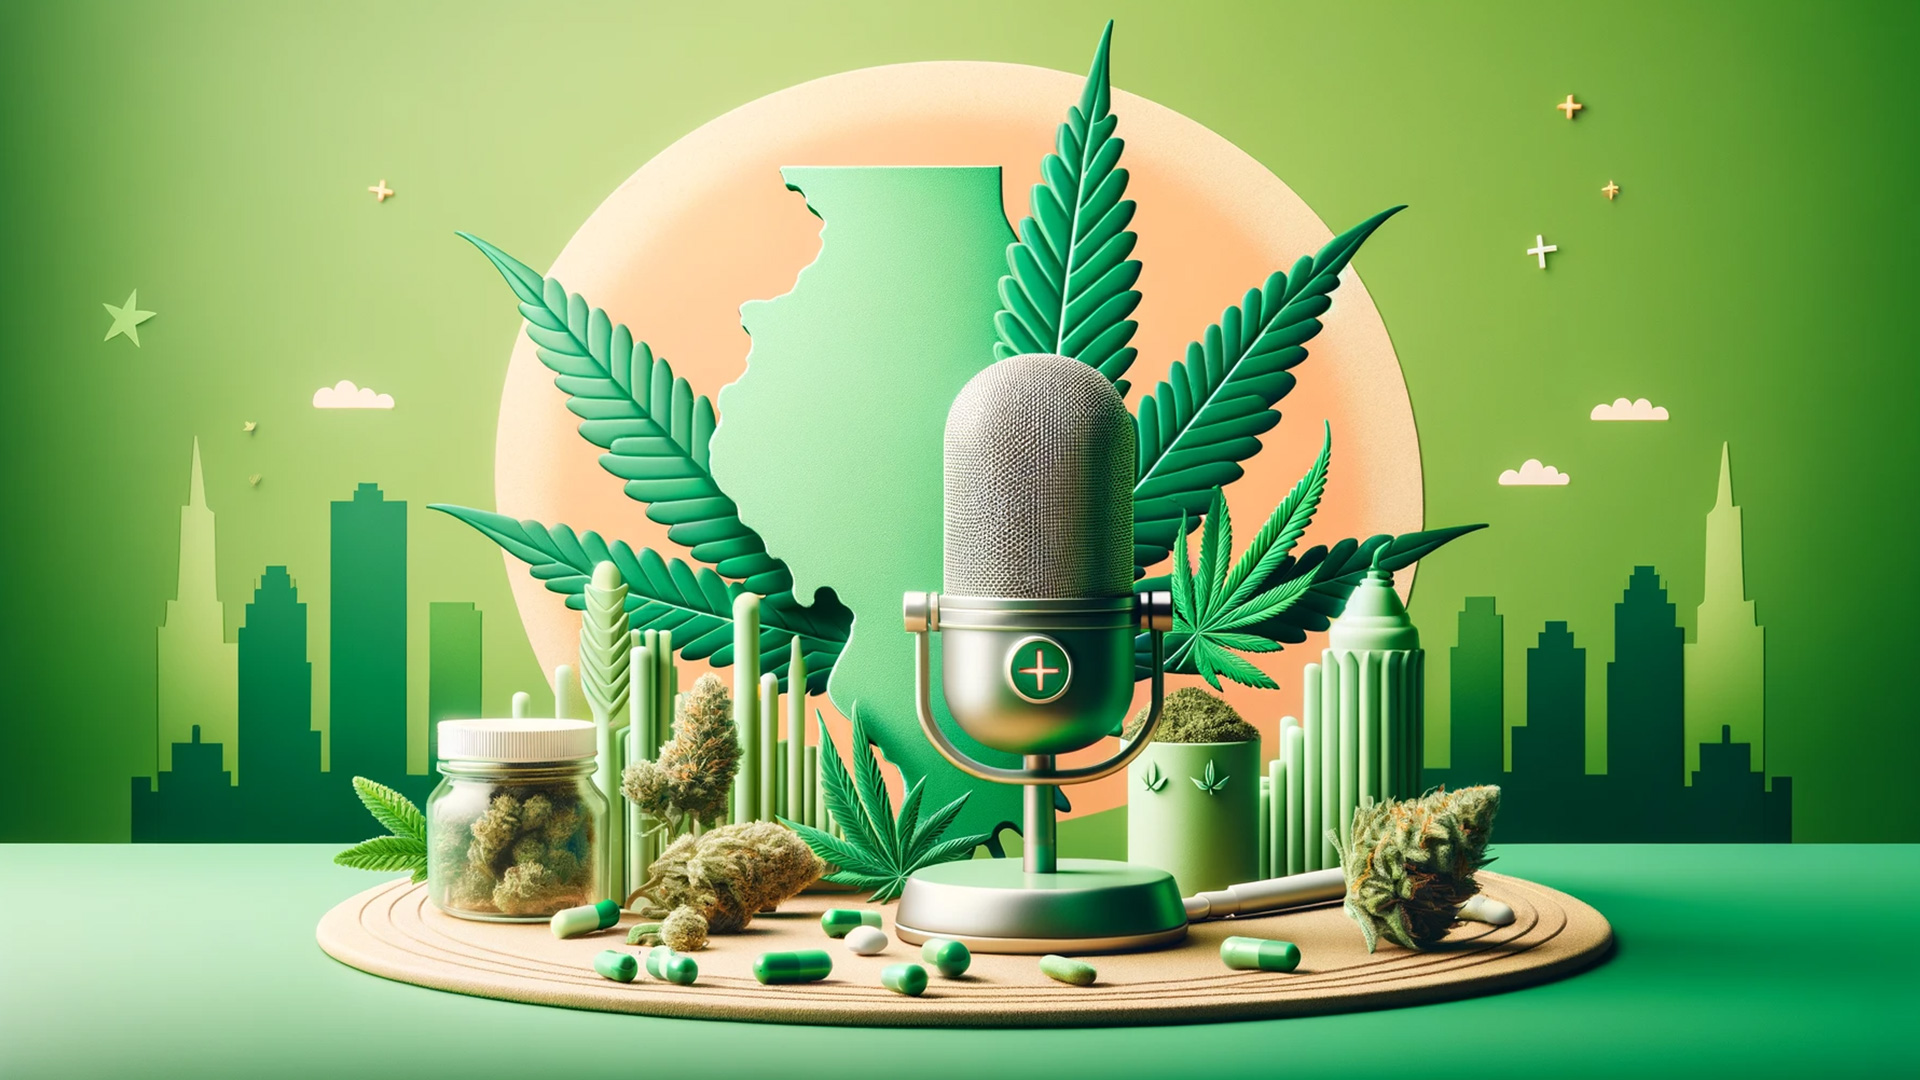 Podcast microphone and cannabis leaf with Illinois backdrop, symbolizing a discussion on cannabis industry insights